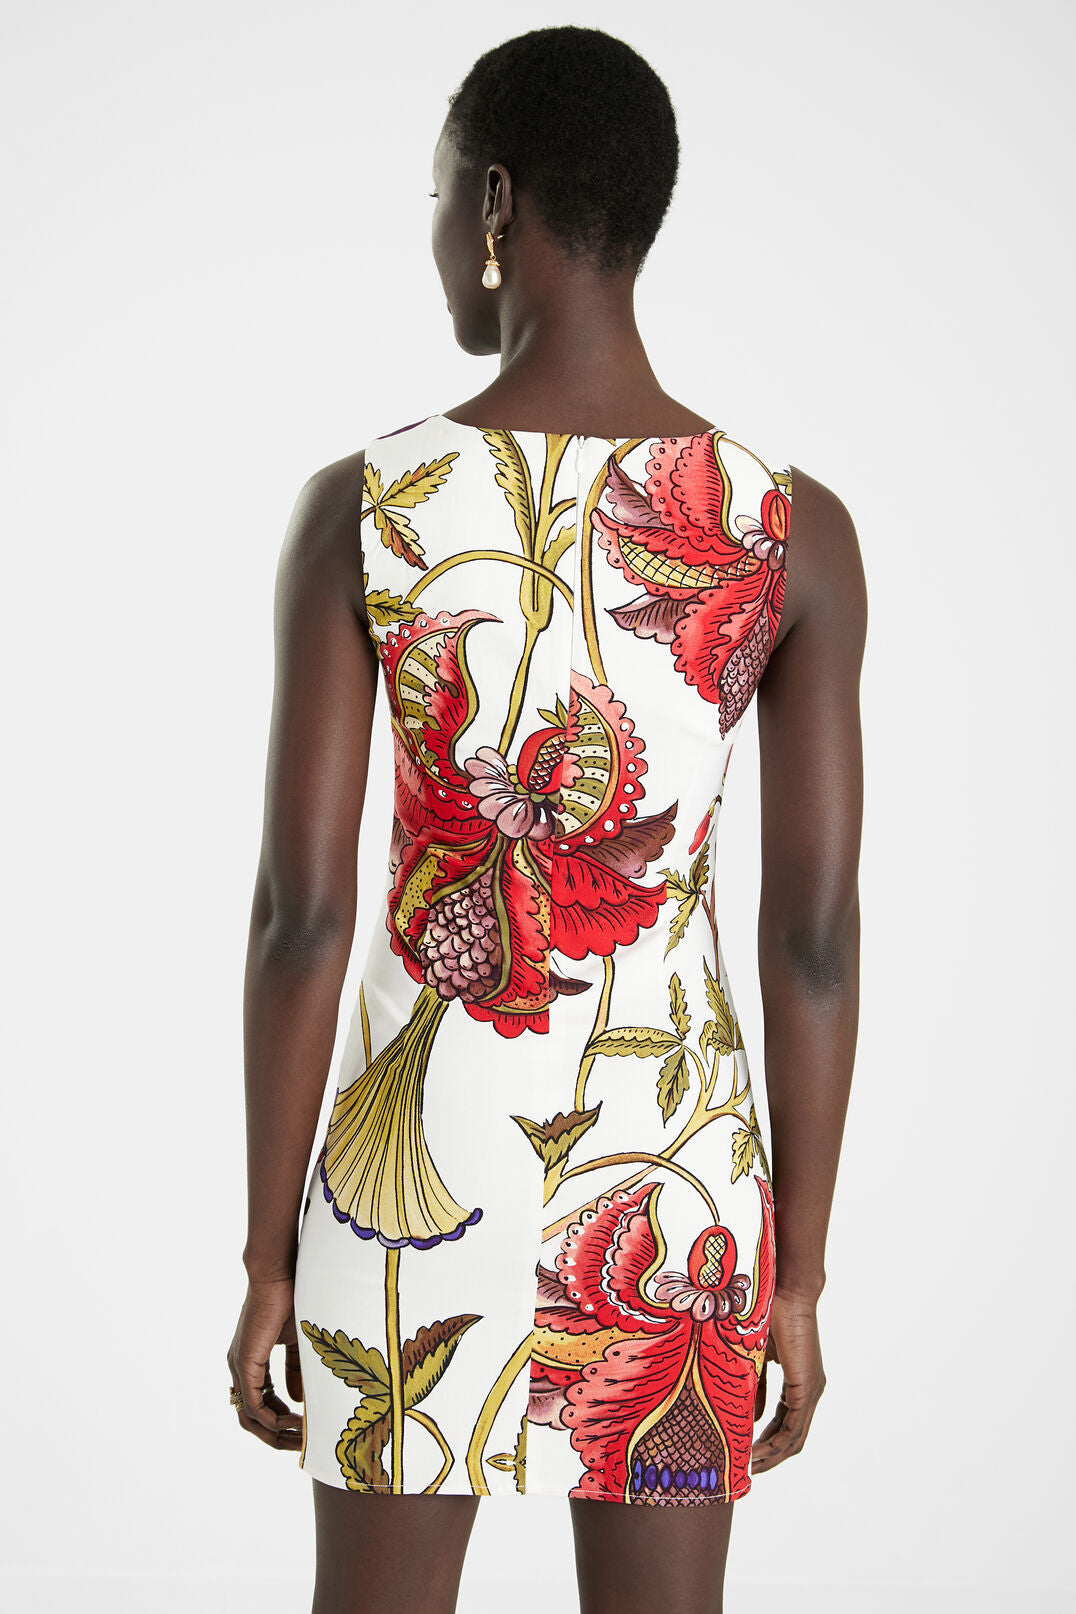 Sleeveless Sunflower Tank Dress - Glen
This dress is flattering for three reasons: its slim pattern that is fitted to your body, its big floral print and because it was designed by Mr. Christian Lacroix. A marvel. Square neck Zipper on back Big print of flowers with big sunflower on front The back part with print of floral motifs Designed by Mr. Christian Lacroix Slim fit Above the knee Wide straps Care: Machine wash cold inside out, do not bleach or dry clean Low iron, do not tumble dry Fabric: Inner fabri